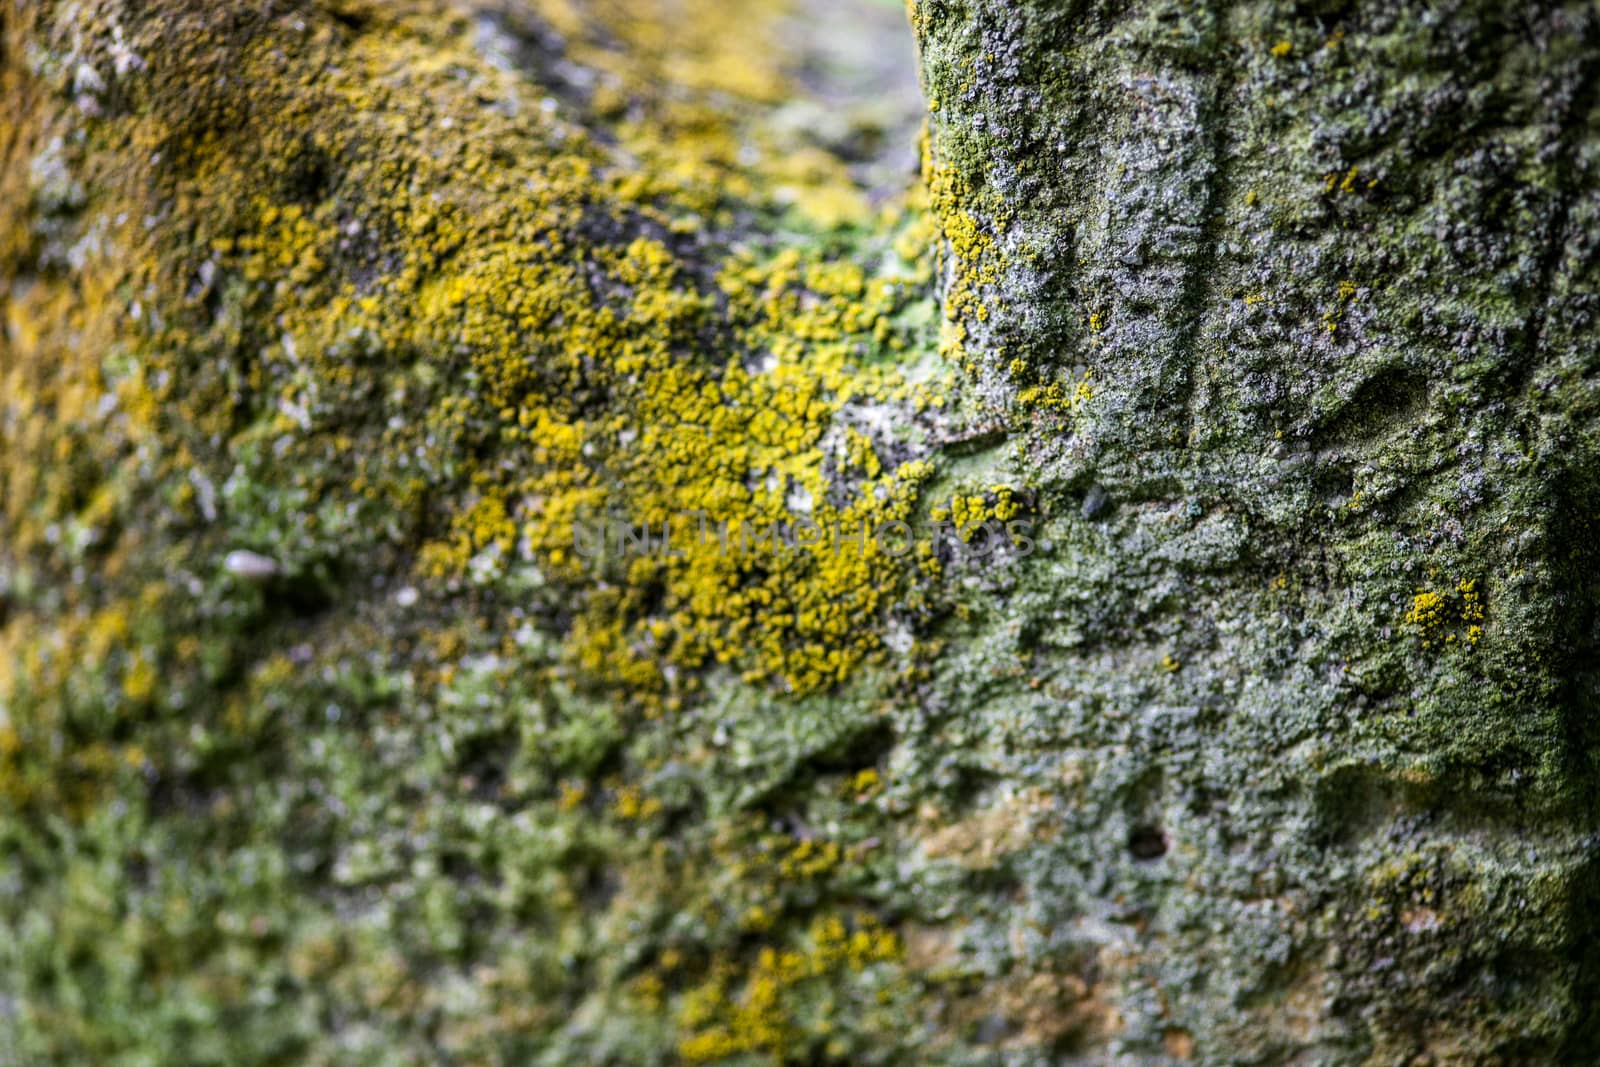 Moss-grown surface of the old stone cross  by rootstocks